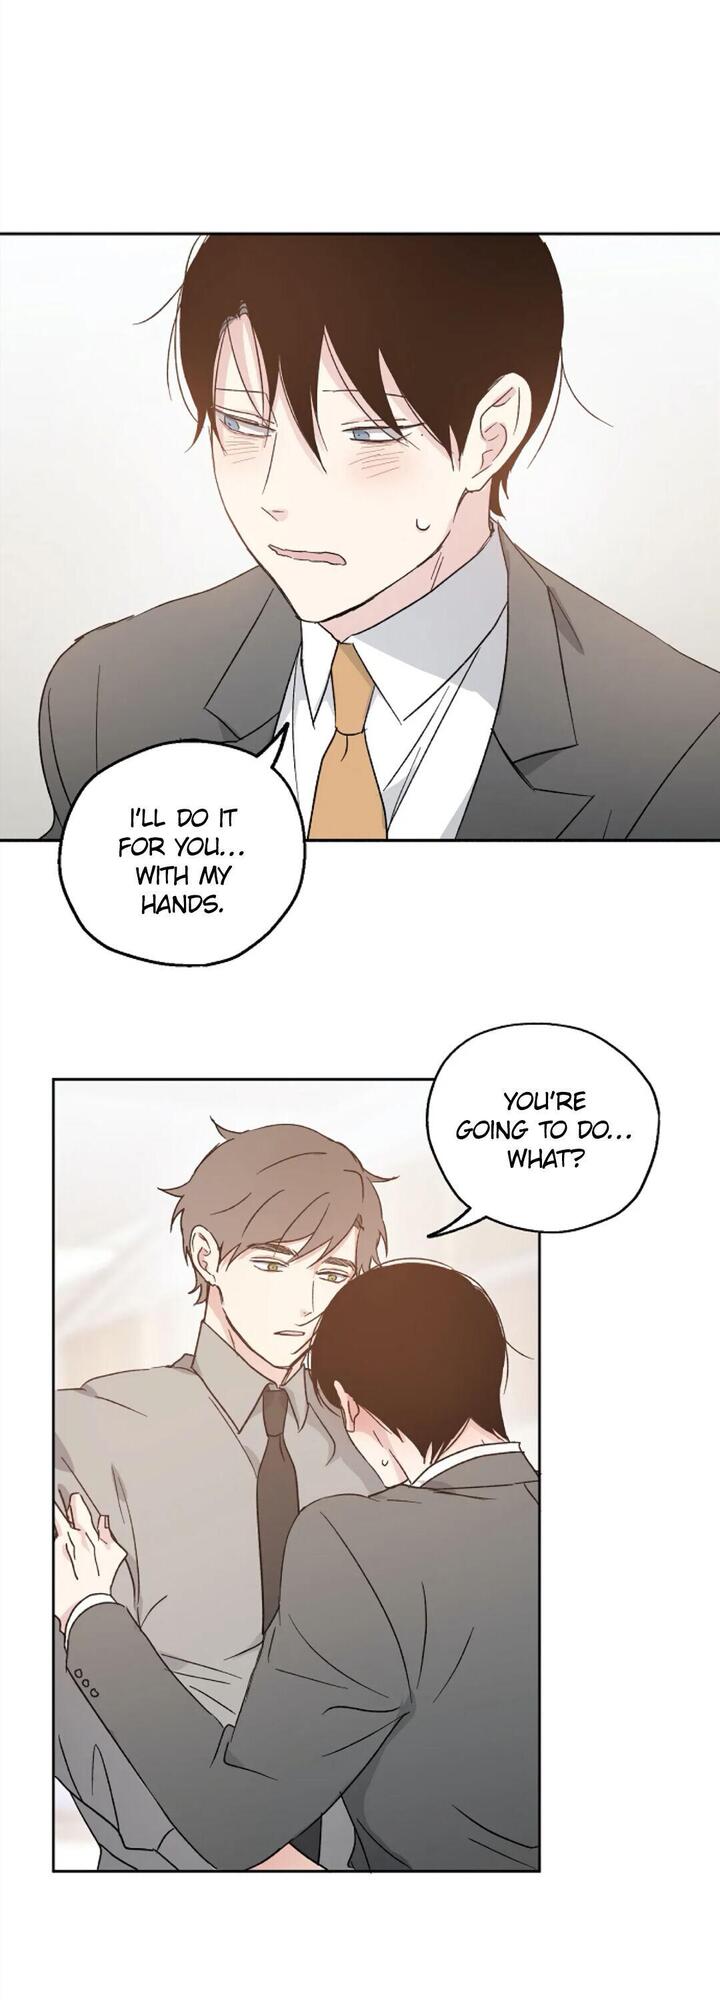 Success Of Love BL Yaoi Smut Manhwa › orchisasia.org